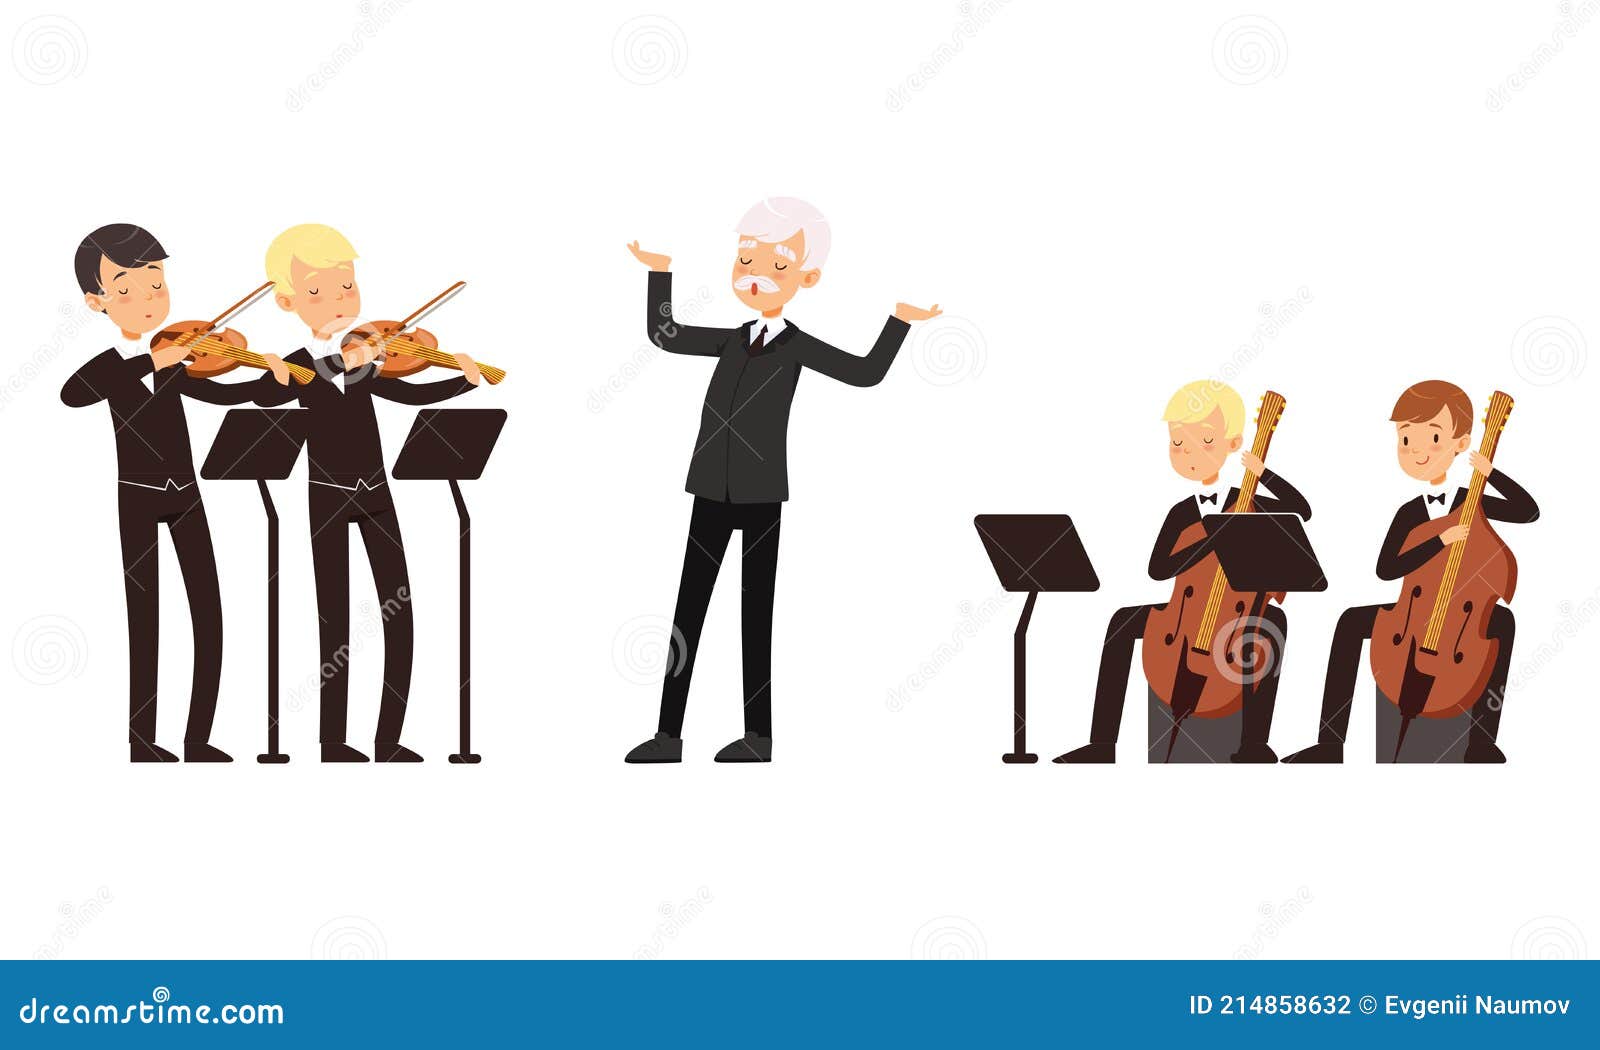 symphonic orchestra playing classical music performing on stage, conductor and musicians playing violins cello cartoon